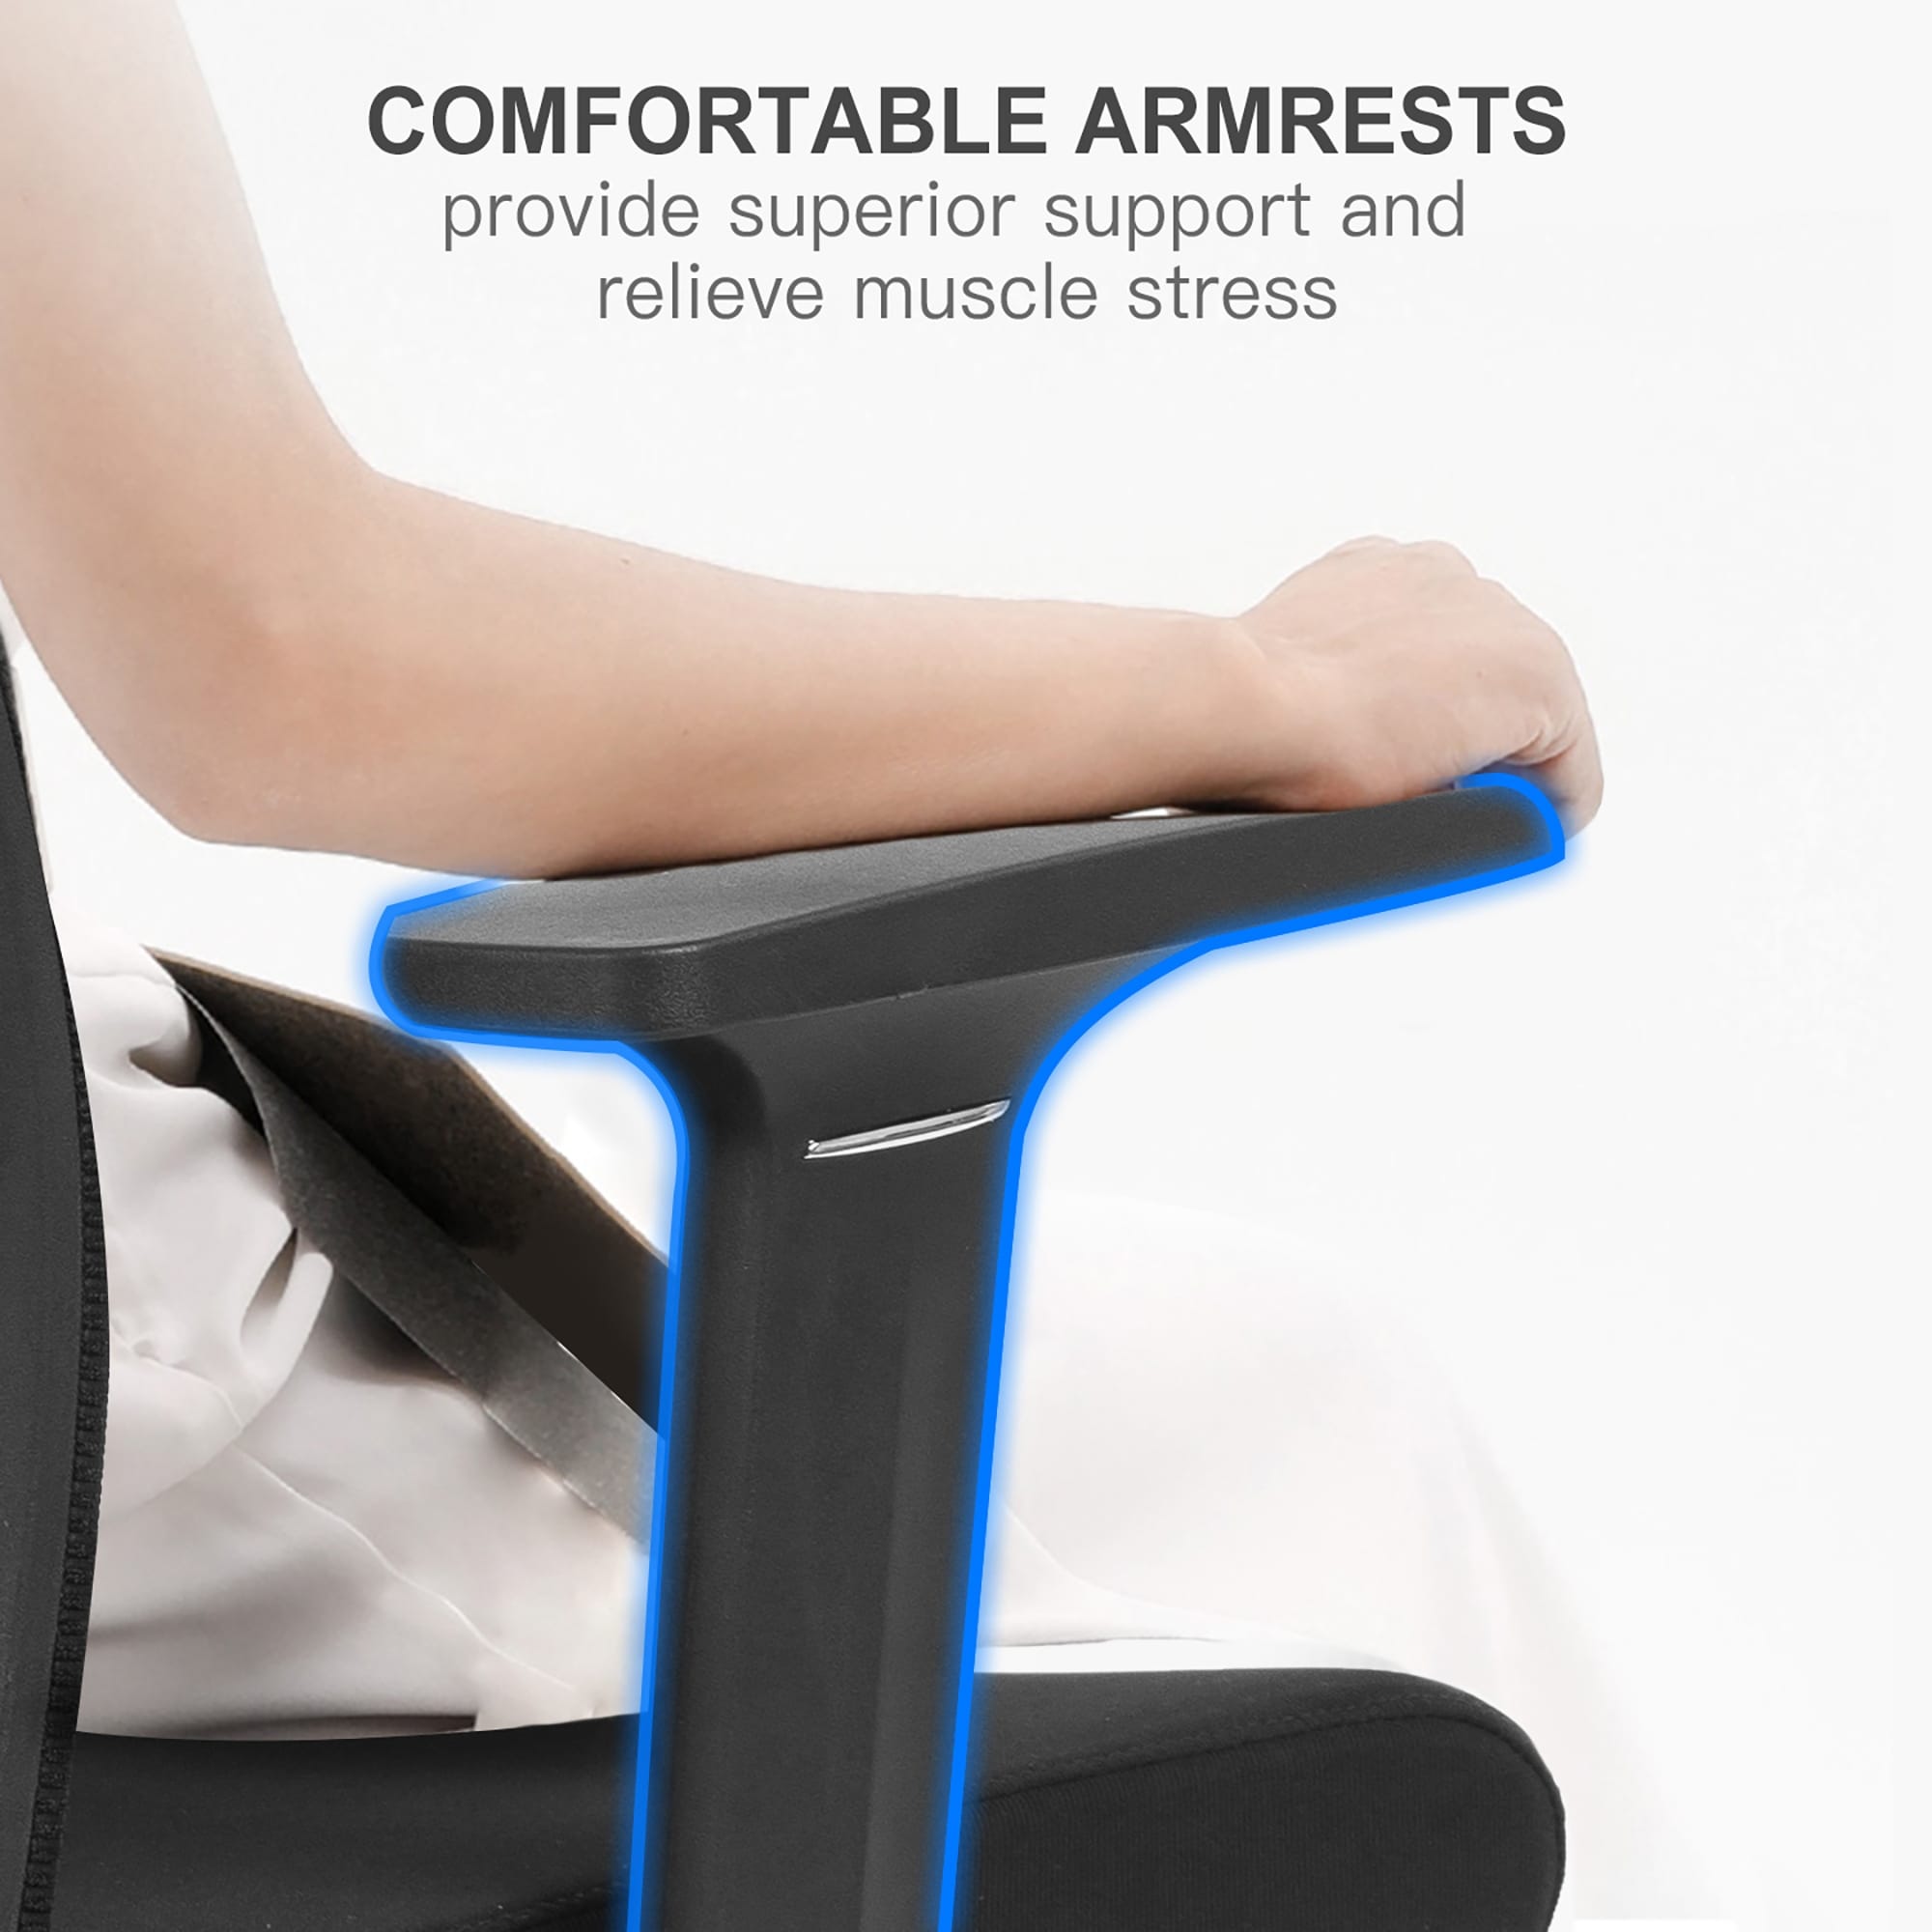 https://ak1.ostkcdn.com/images/products/is/images/direct/07599e69625cc7c8cad785cbce5d3be414ebc128/Homall-Office-Chair-Ergonomic-Desk-Chair-with-Lumbar-Support%2CBlack.jpg